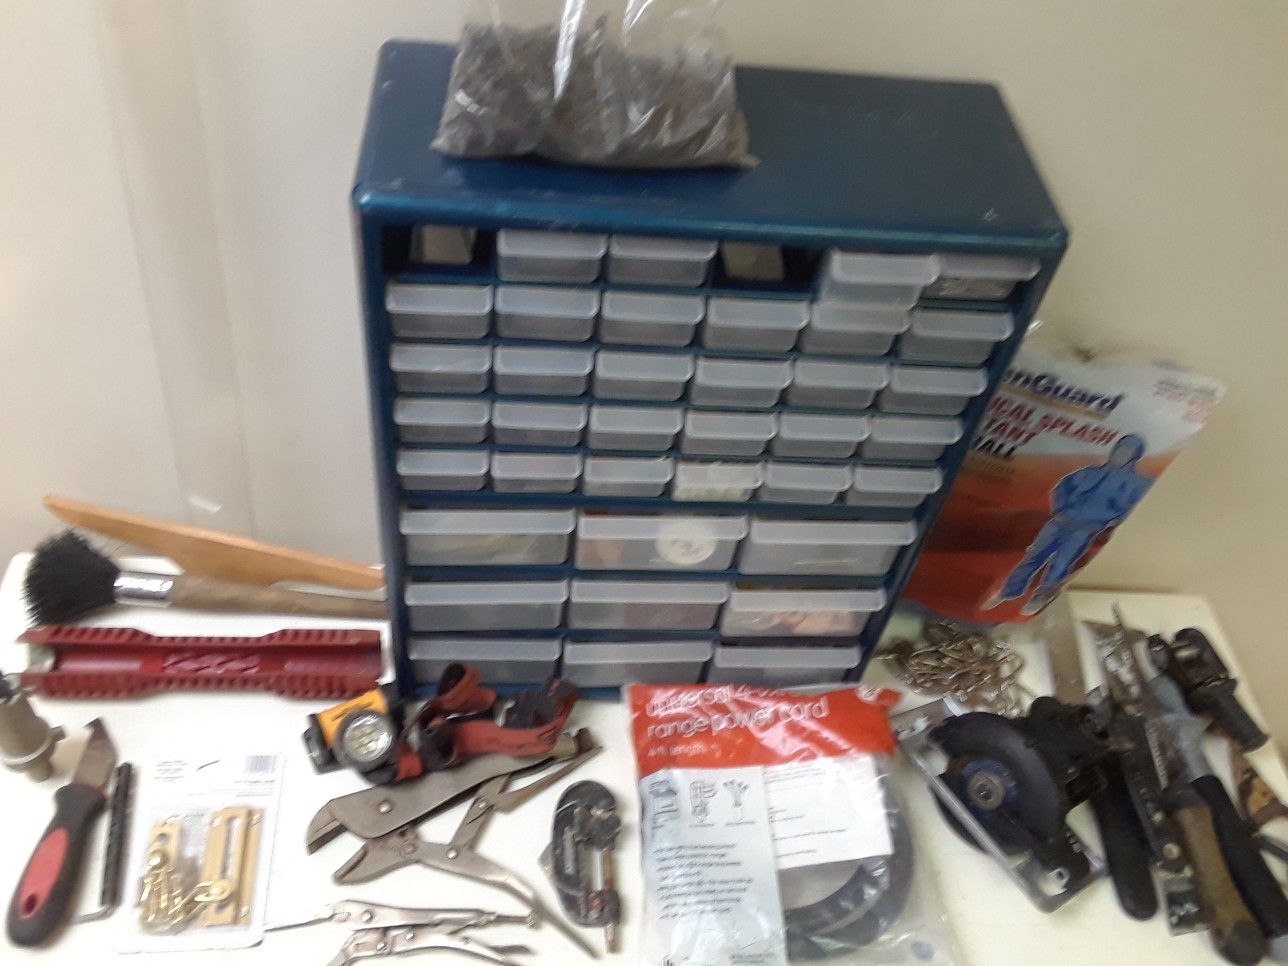 Plumbing ,electrician, handyman tools and some remodeling supplies new&used